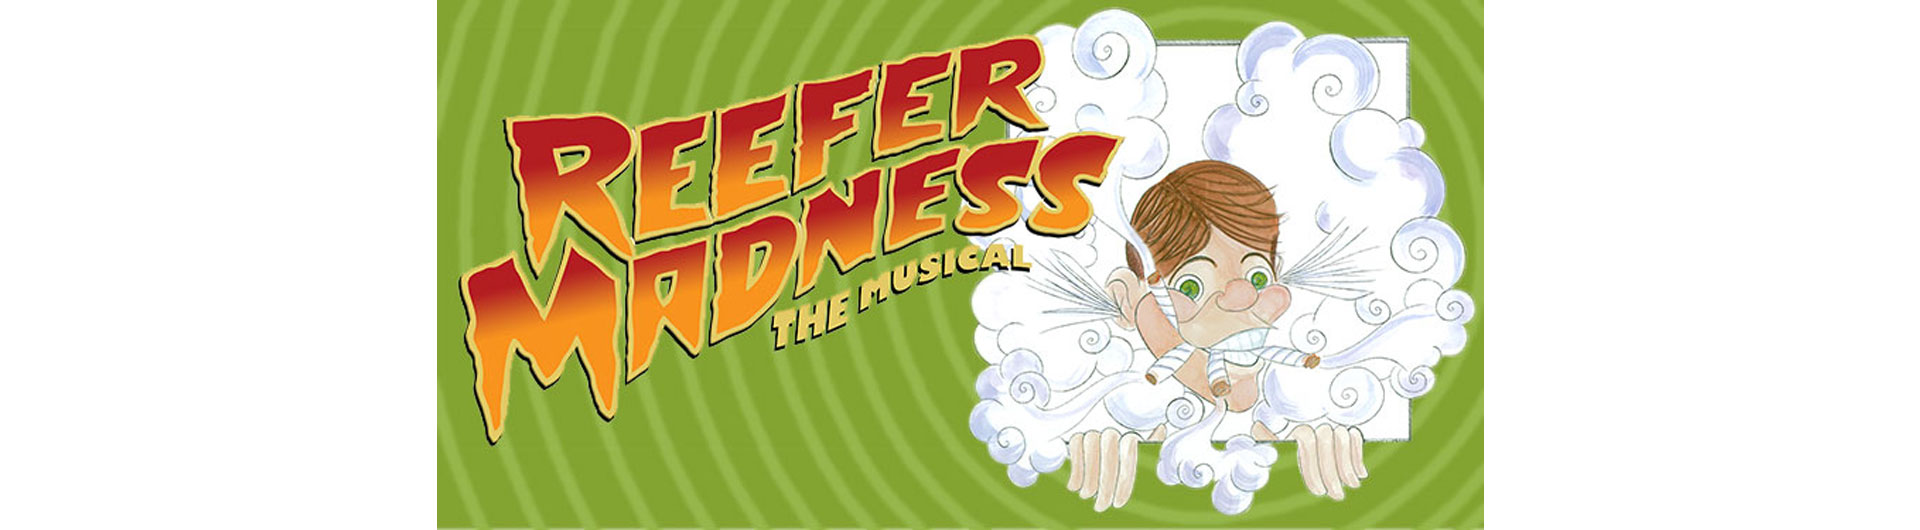 Reefer Madness the Musical